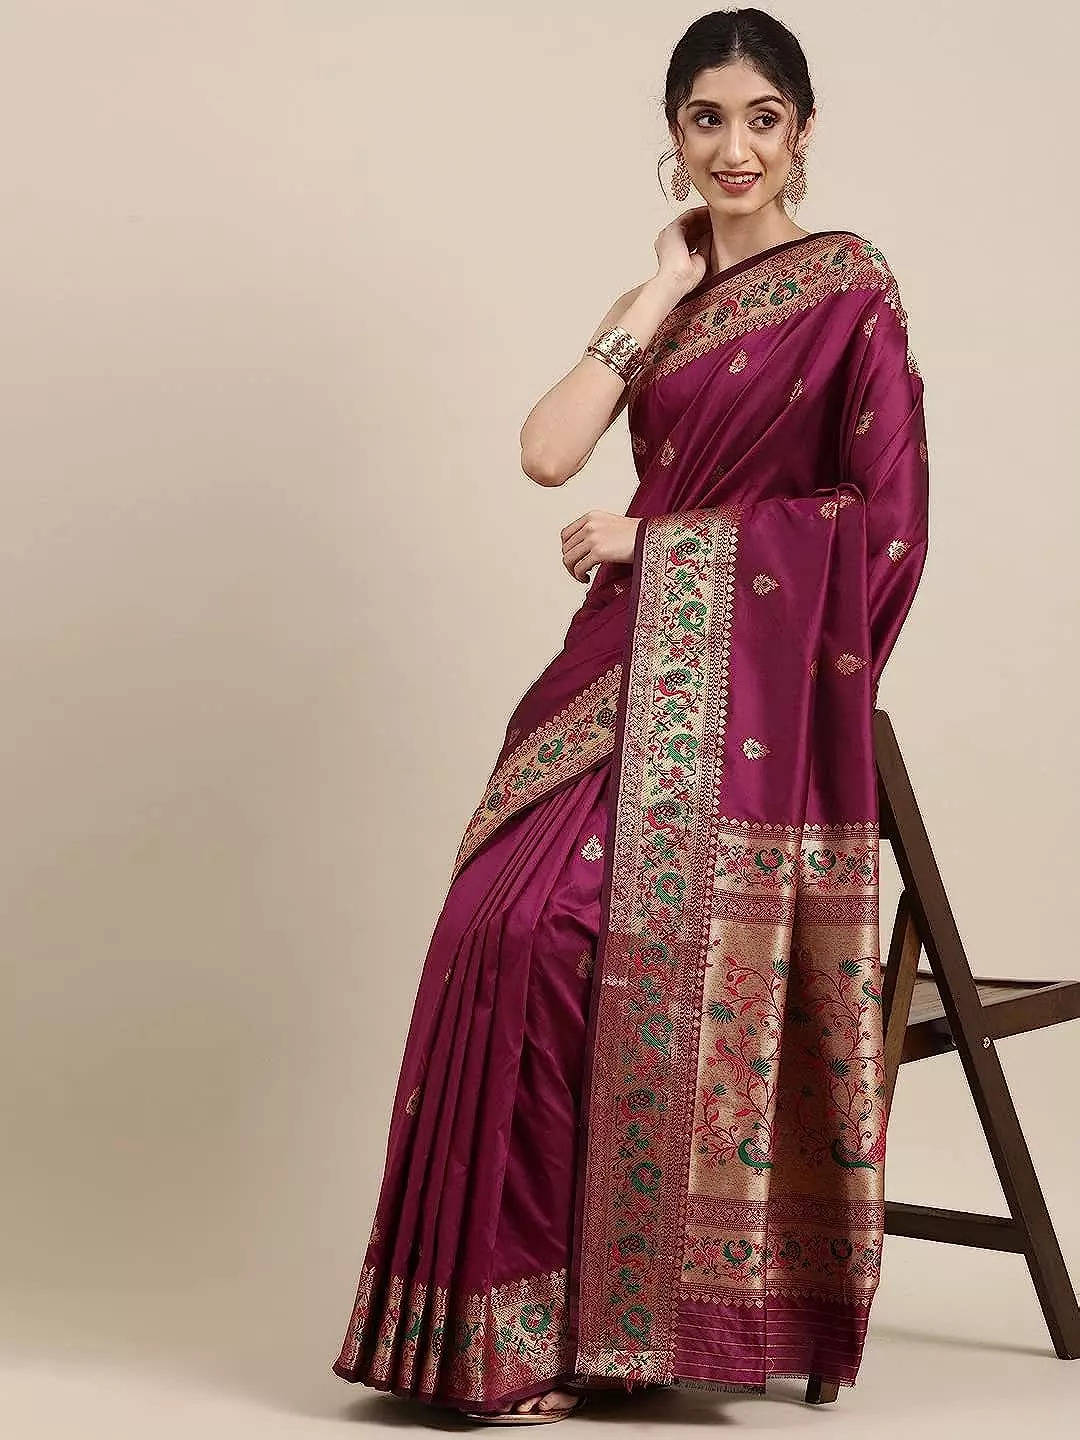 Paithani Sarees: 10 Best Paithani Sarees for Women in India For an ...